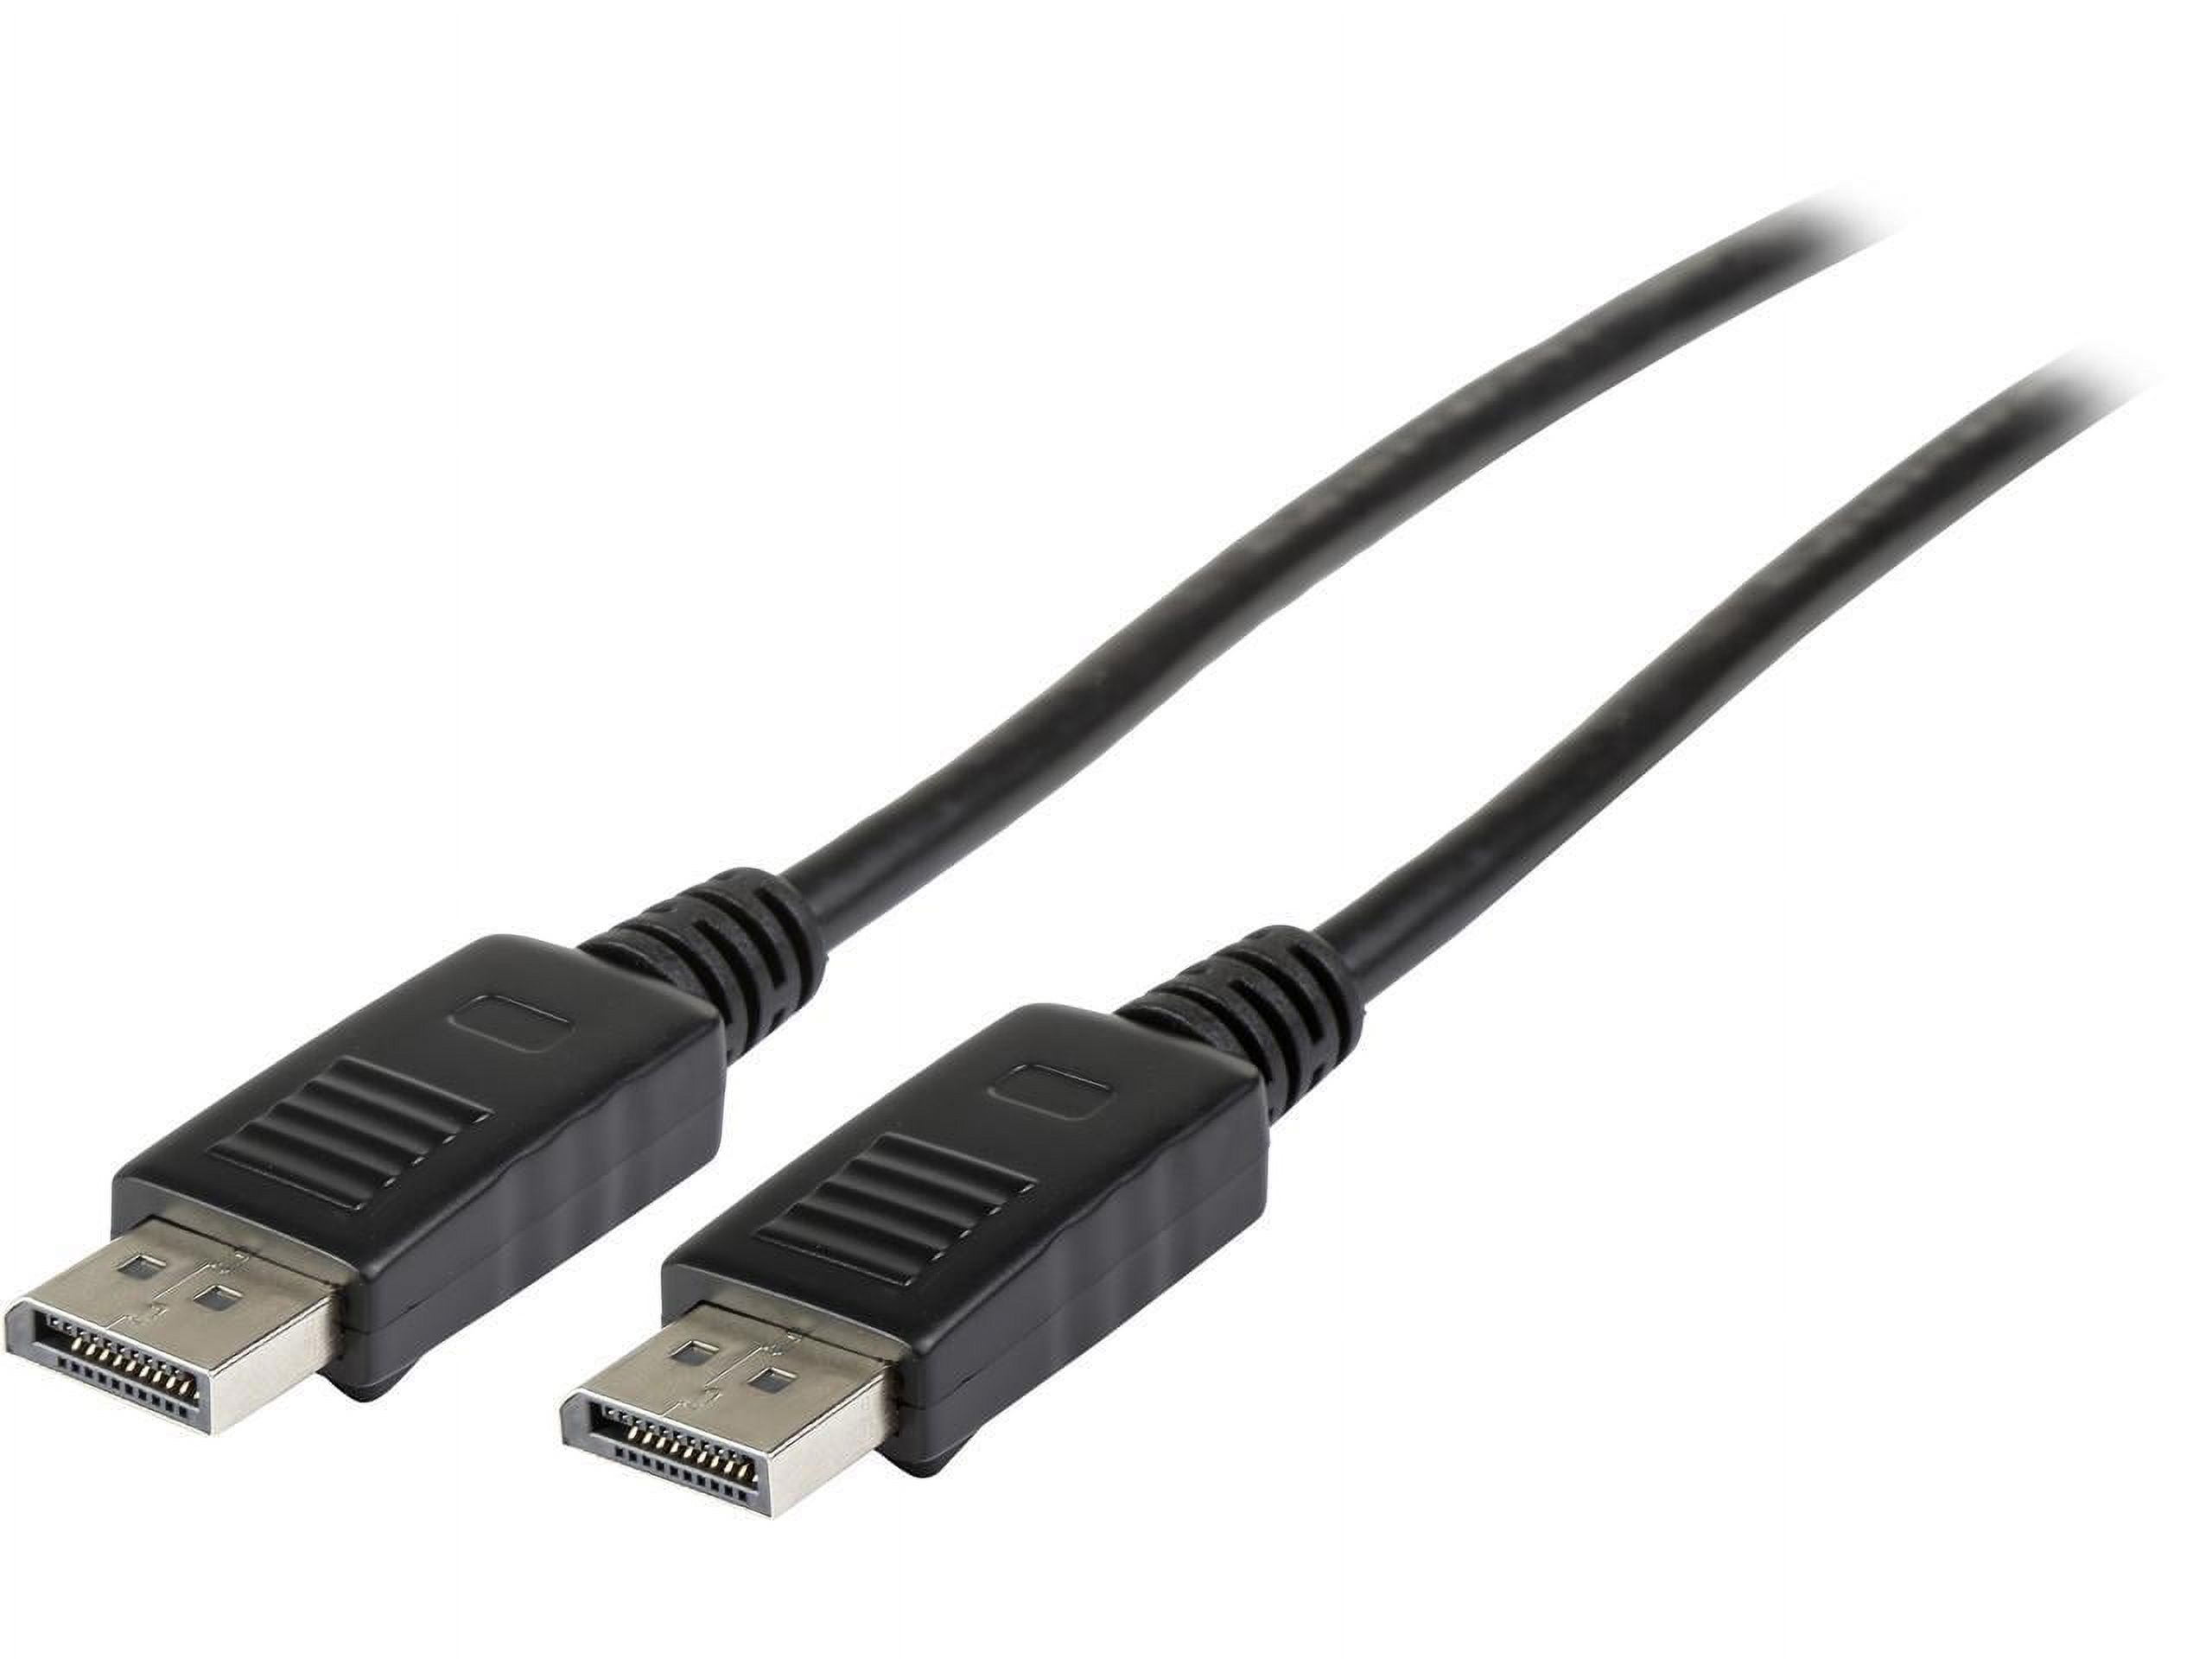 Tripp Lite DisplayPort Cable with Latches (M/M), DP, 4K x 2K, 6-ft. (P580-006) - image 1 of 3